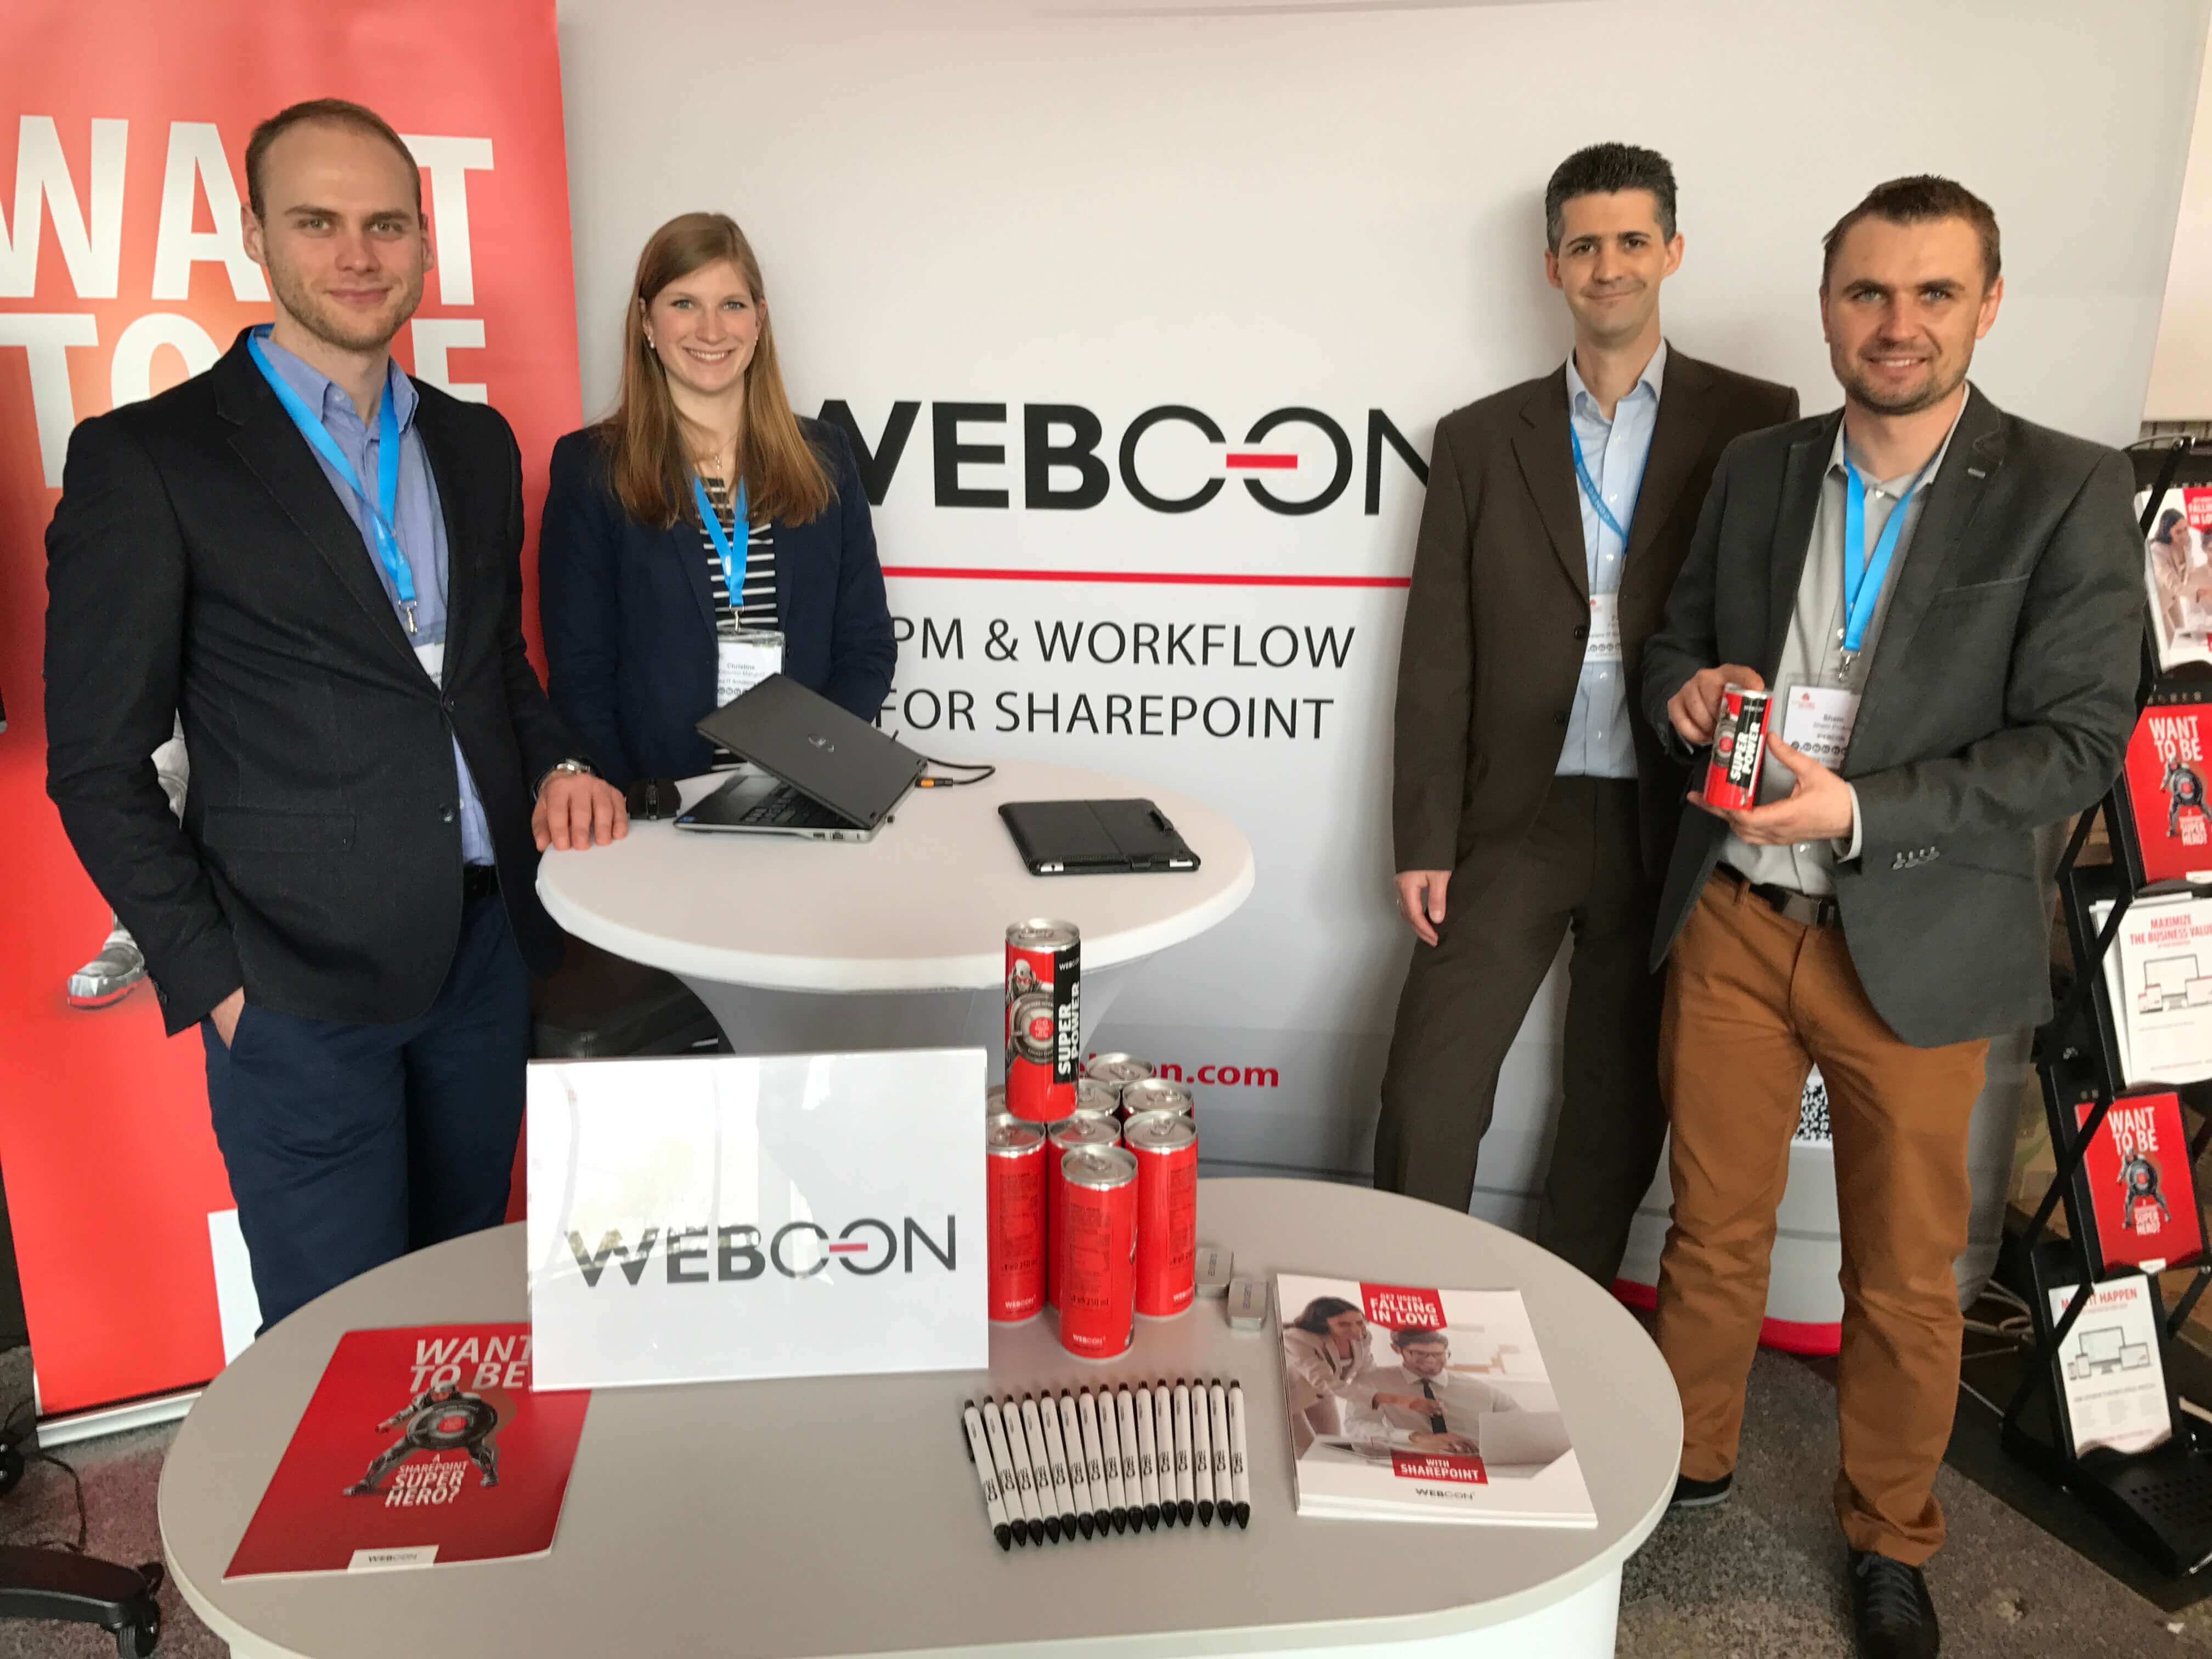 WEBCON booth at Intra.NET Reloaded Berlin 2017